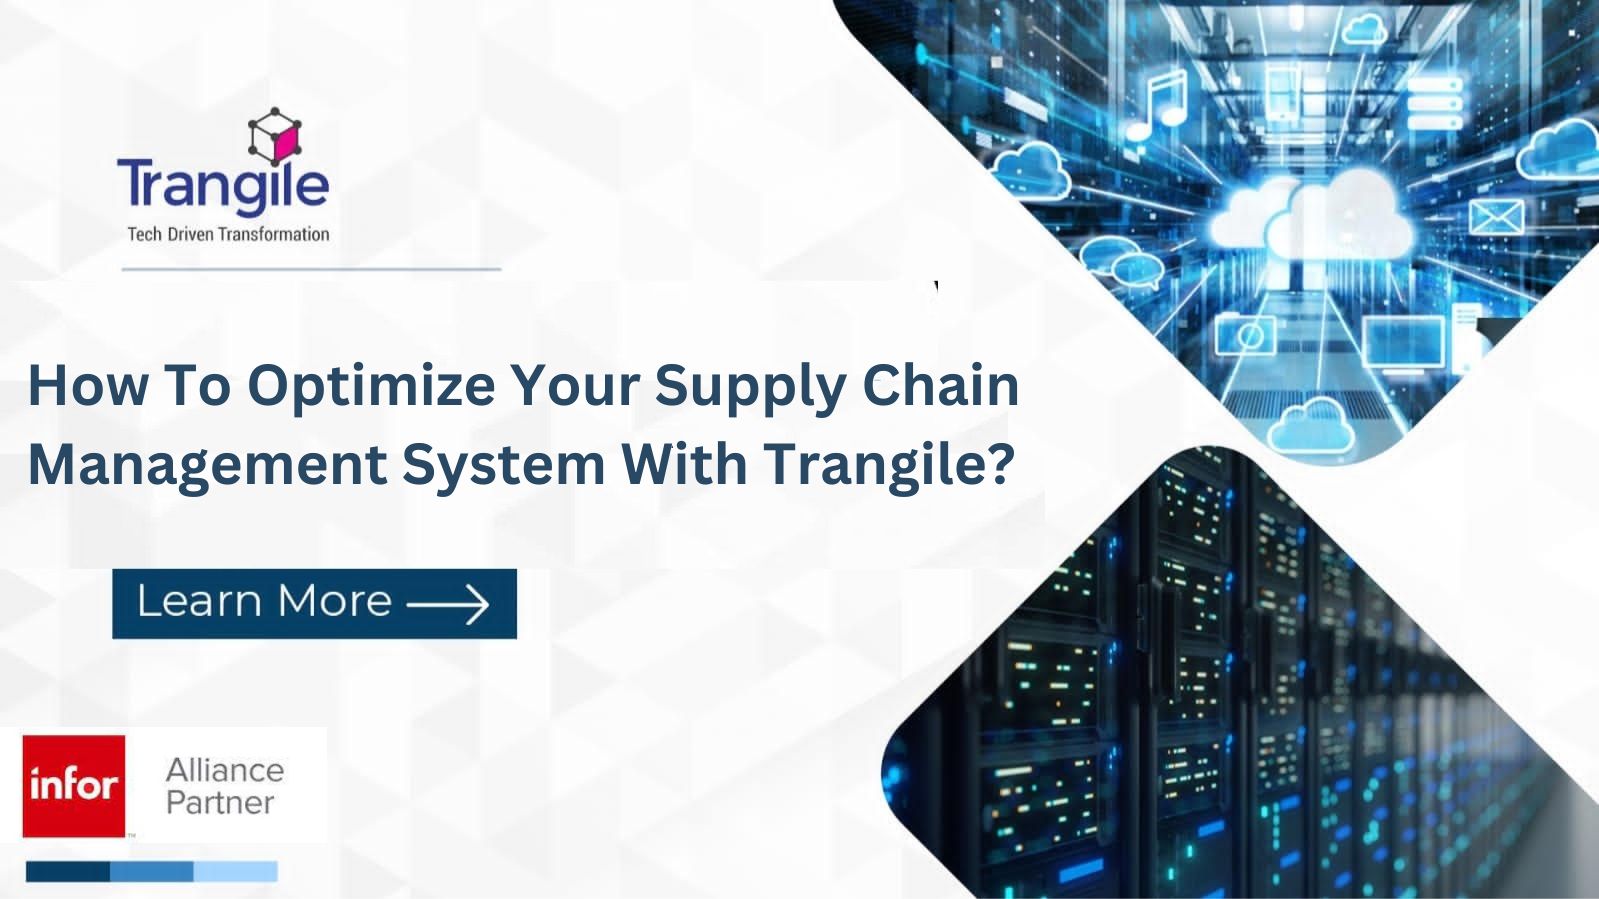 How To Optimize Your Supply Chain Management System With Trangile?